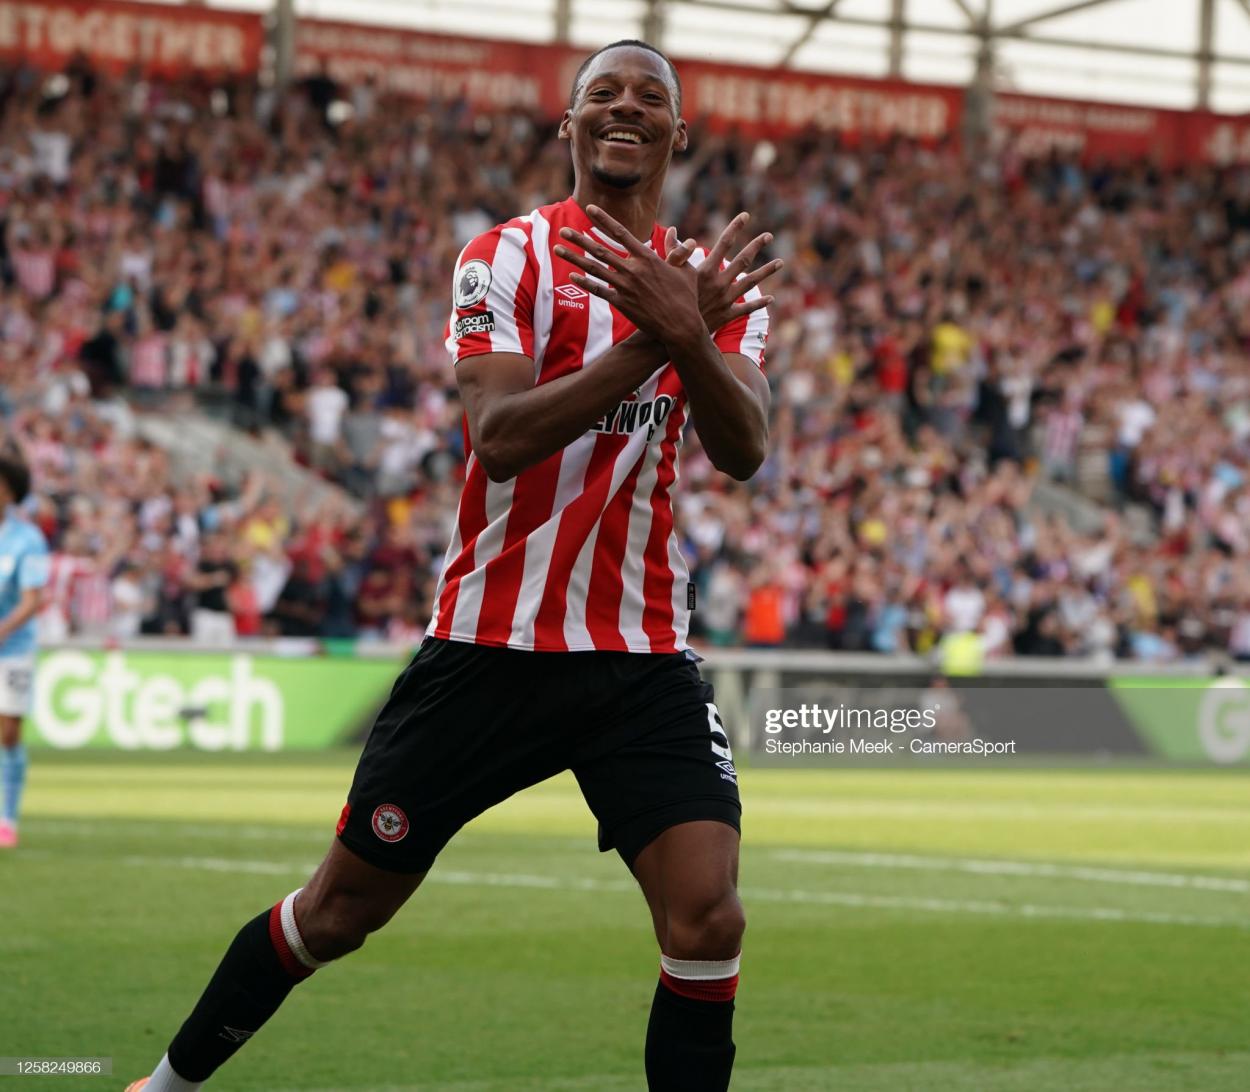 Ethan Pinnock celebrates his goal to give Brentford all three points against Man City on the final day of the season(Photo by Stephanie Meek - CameraSport via Getty Images)